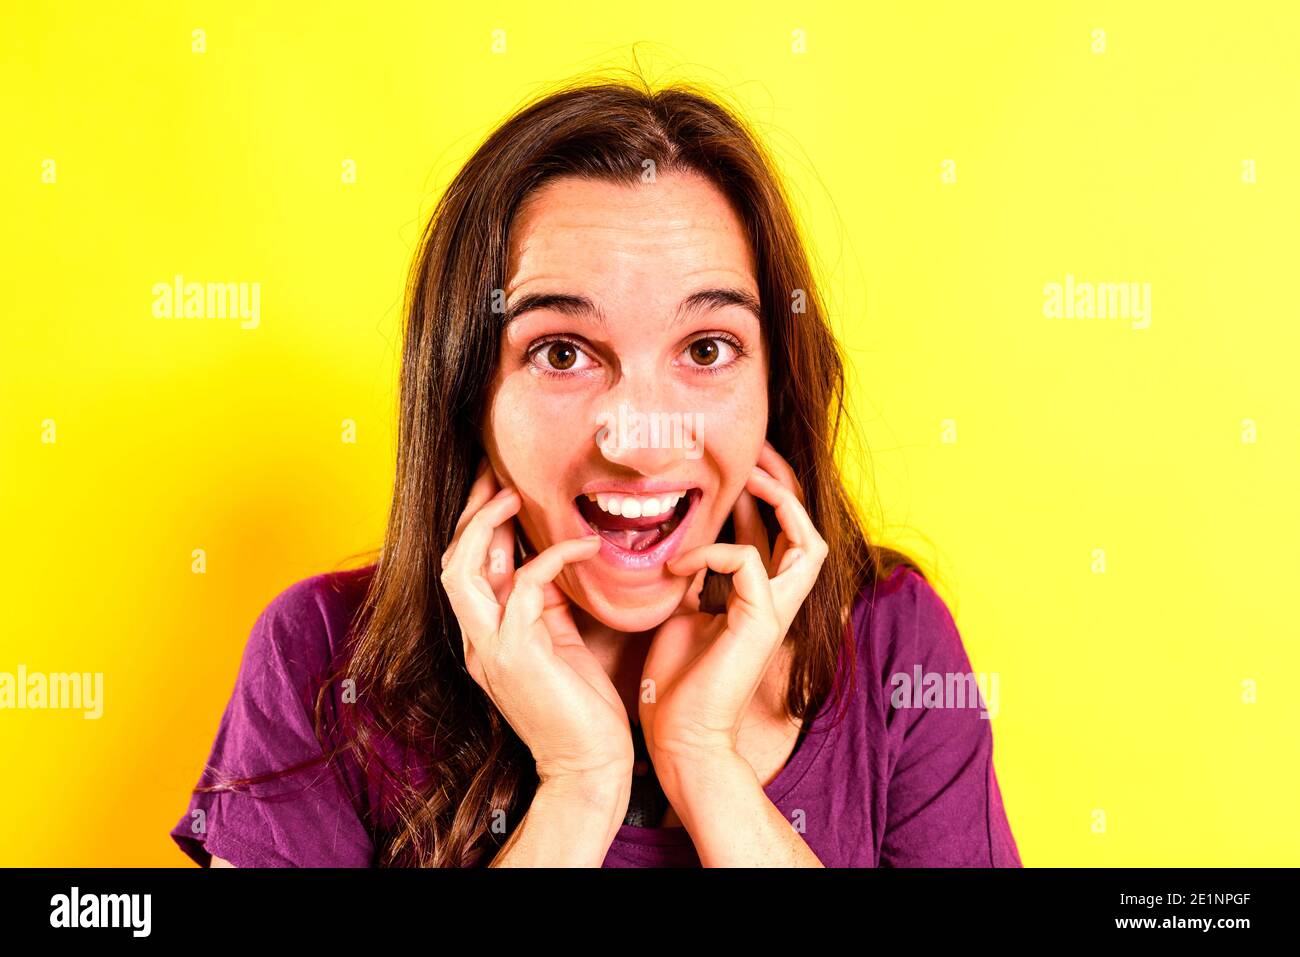 Portrait of a young woman with scared and shocked expression with surprise, fear and excited face, on isolated background. Stock Photo